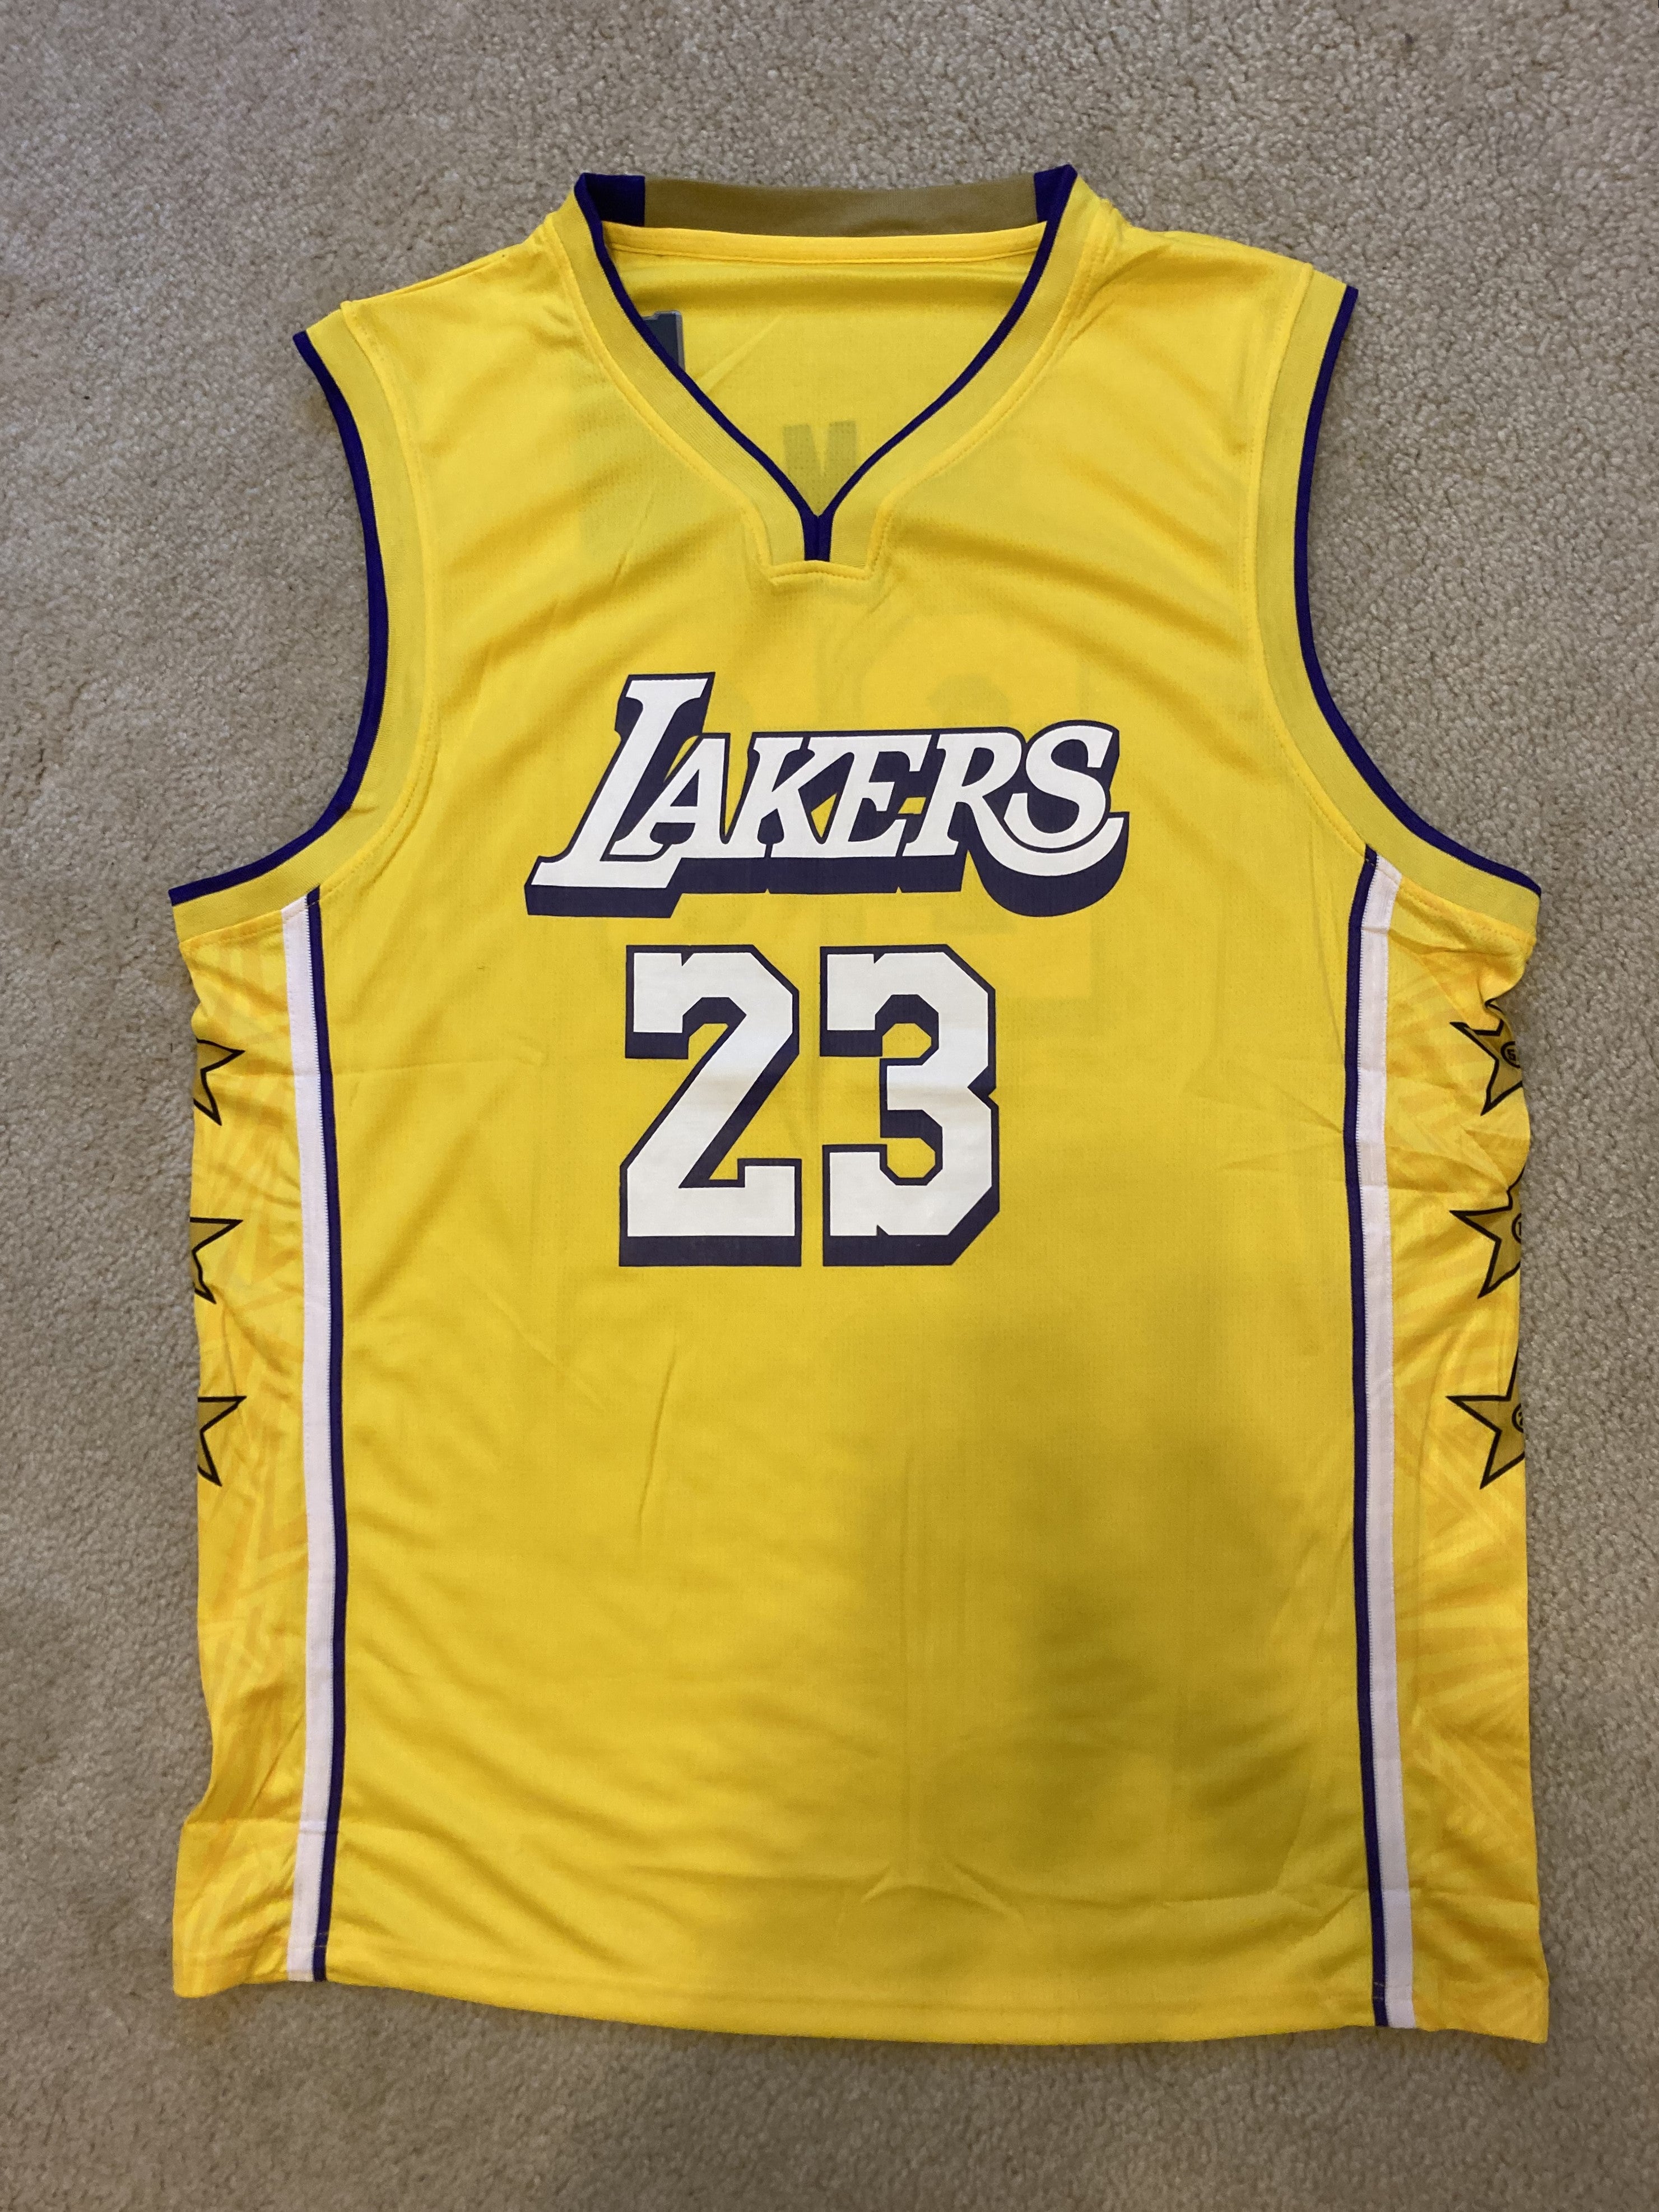 Kobe Bryant Los Angeles Lakers 2018-19 Edition Youth #24 City Jersey -  Purple 268016-182